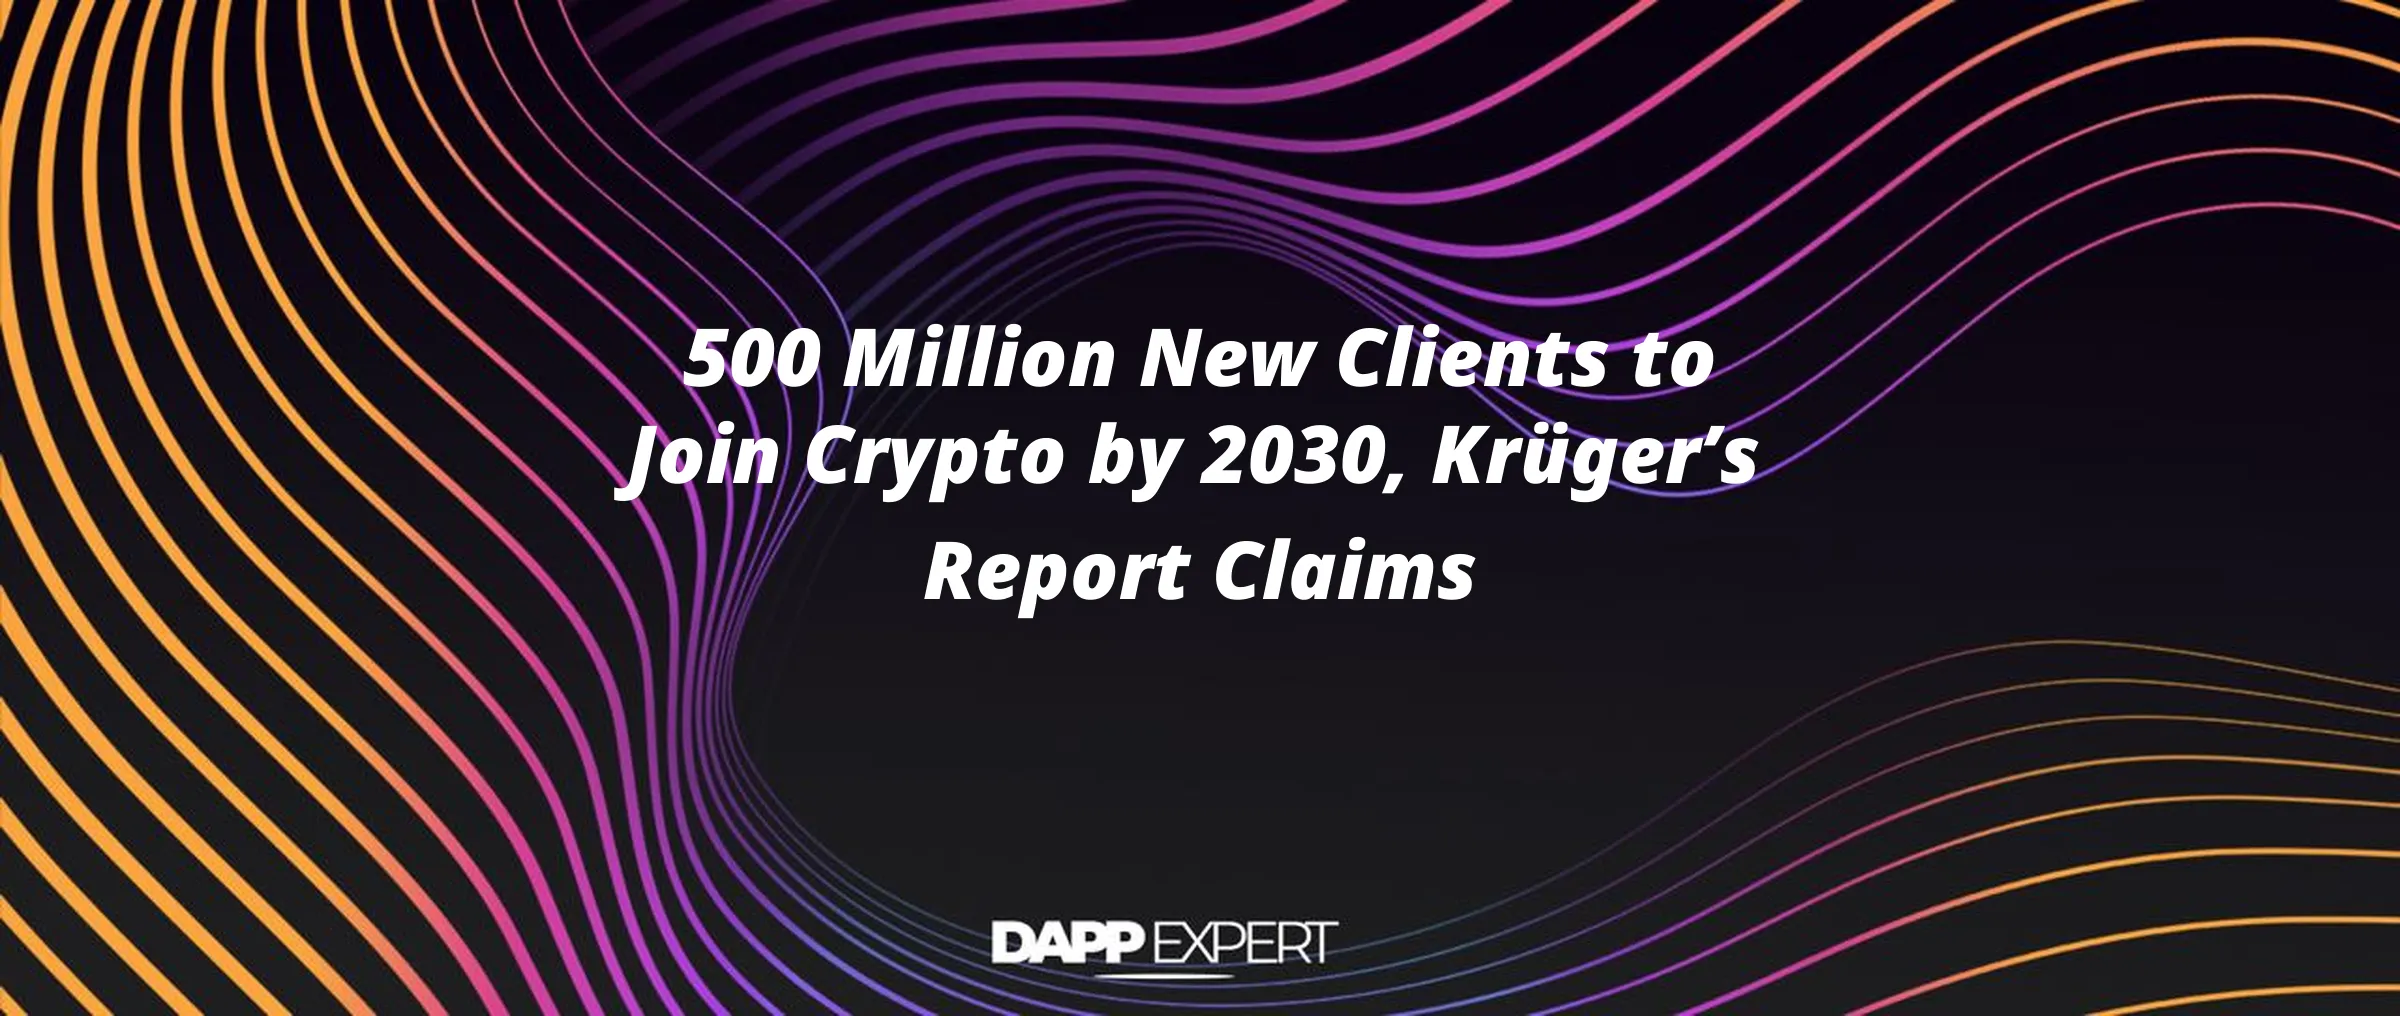 500 Million New Clients to Join Crypto by 2030, Krüger’s Report Claims